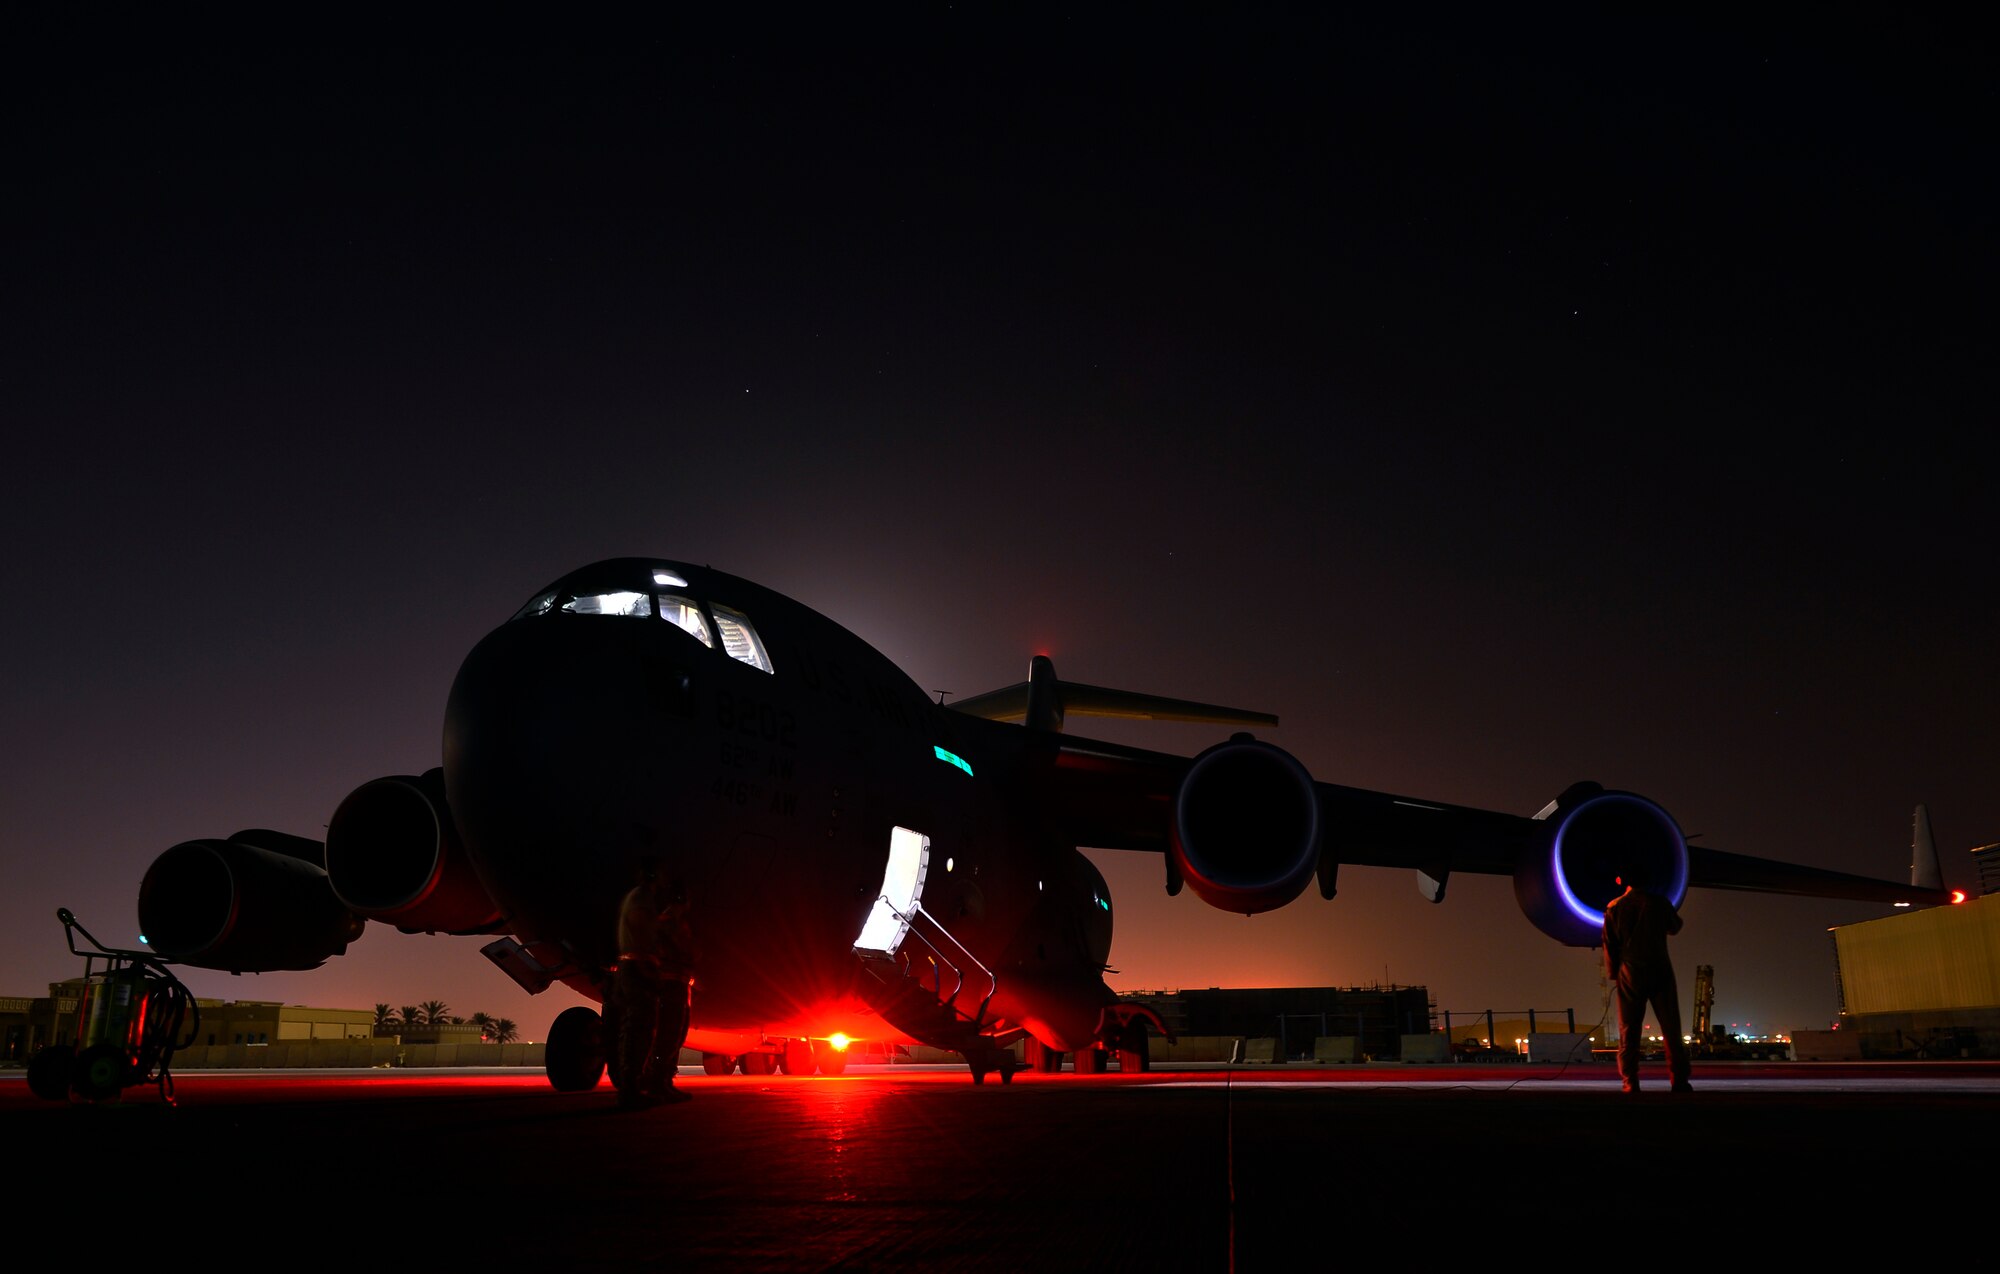 Senior Airman Jon Woerzburger awaits engine start prior to a Aug. 30, 2014, humanitarian airdrop mission over Amirli, Iraq. The two C-17 Globemaster IIIs dropped 79 container delivery system bundles of fresh drinking water totaling 7,513 gallons. In addition, two U.S. C-130 Hercules aircraft dropped 30 bundles totaling 3,032 gallons of fresh drinking water and 7,056 meals ready to eat. Woerzburg is a C-17 flying crew chief with the 816th Expeditionary Airlift Squadron. (U.S. Air Force photo/Staff Sgt. Vernon Young 